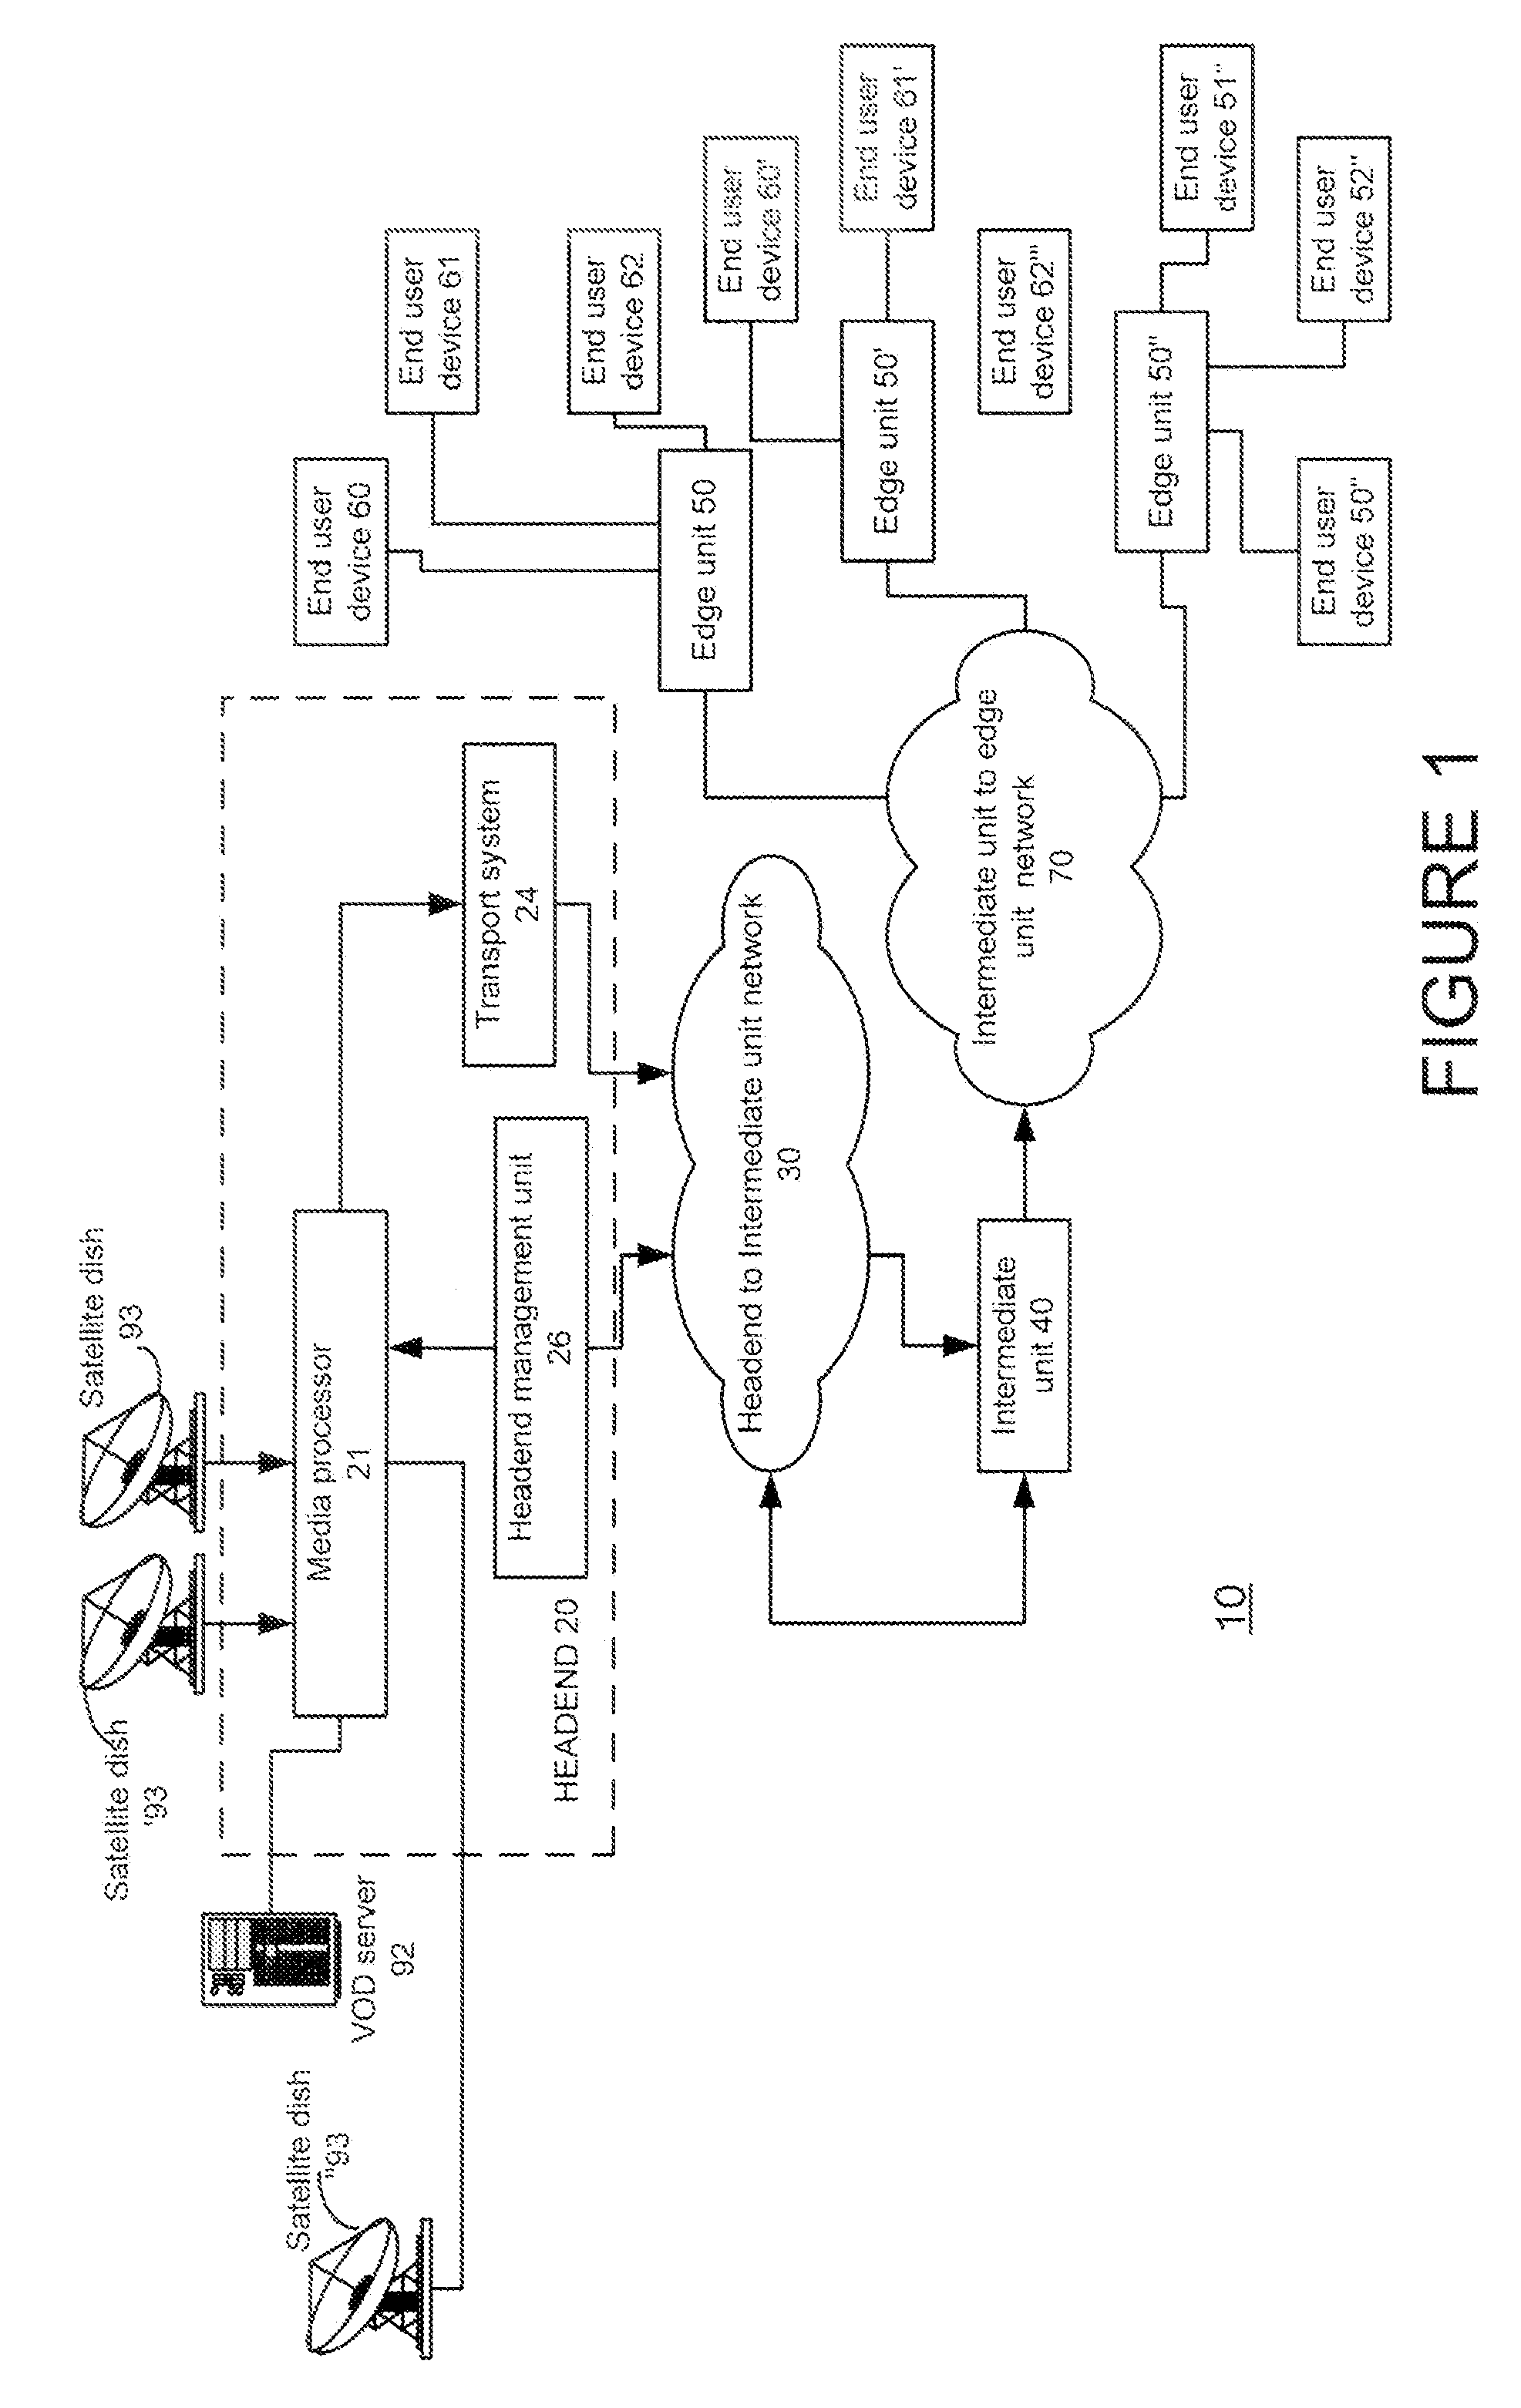 Method and Device for Providing Programs to Multiple End User Devices